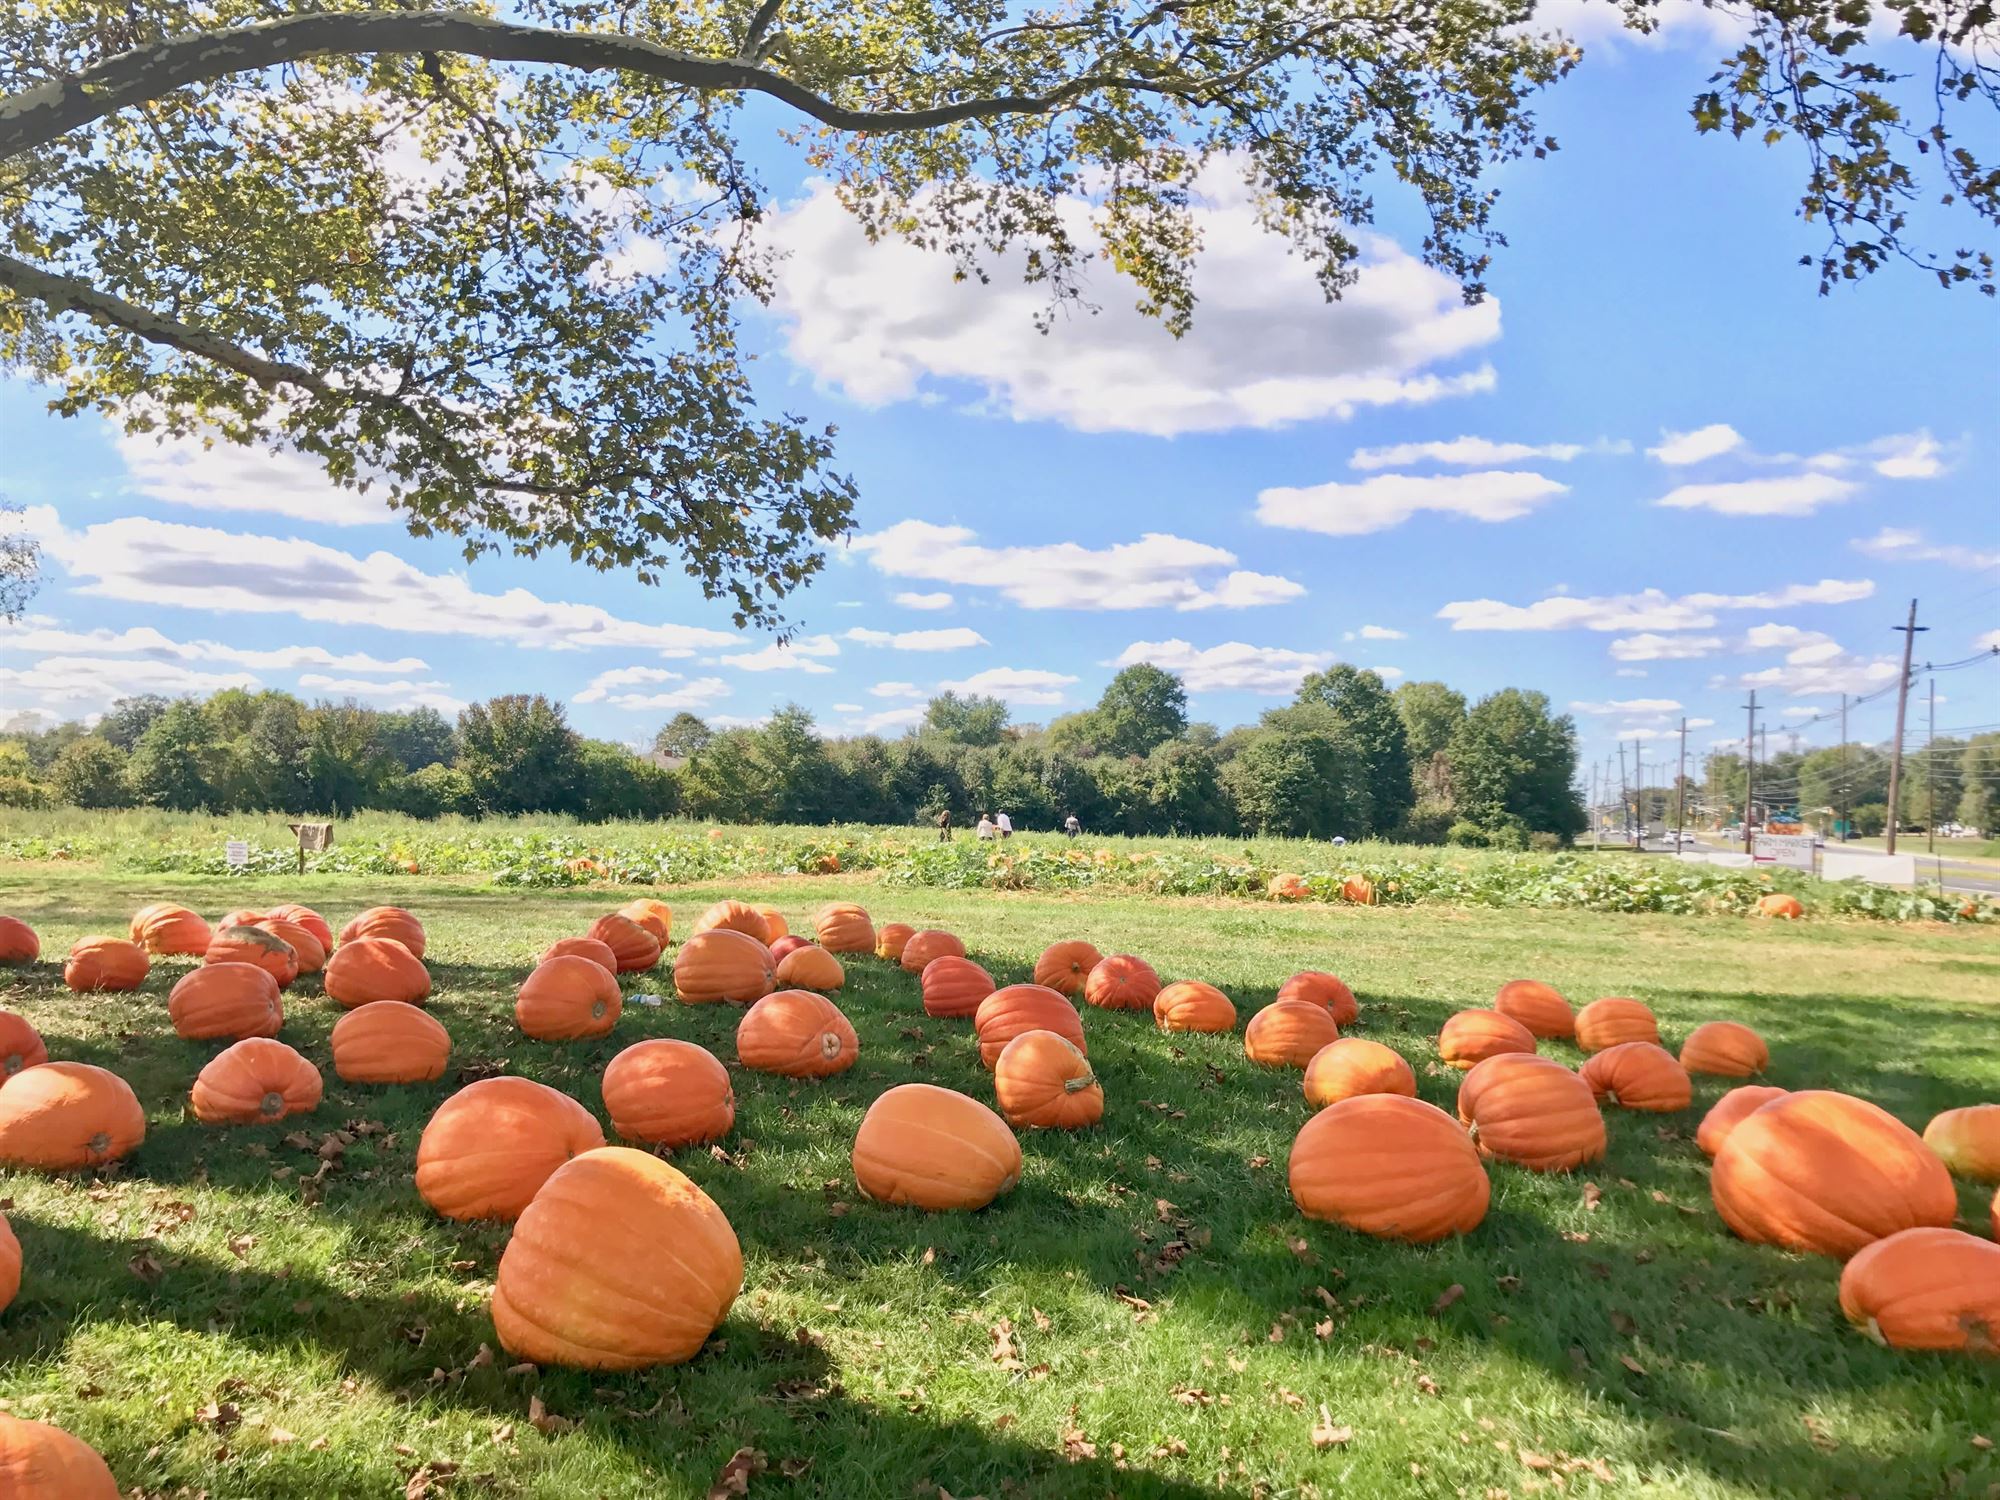 The Best Pumpkin Picking Patches And Farms In NJ